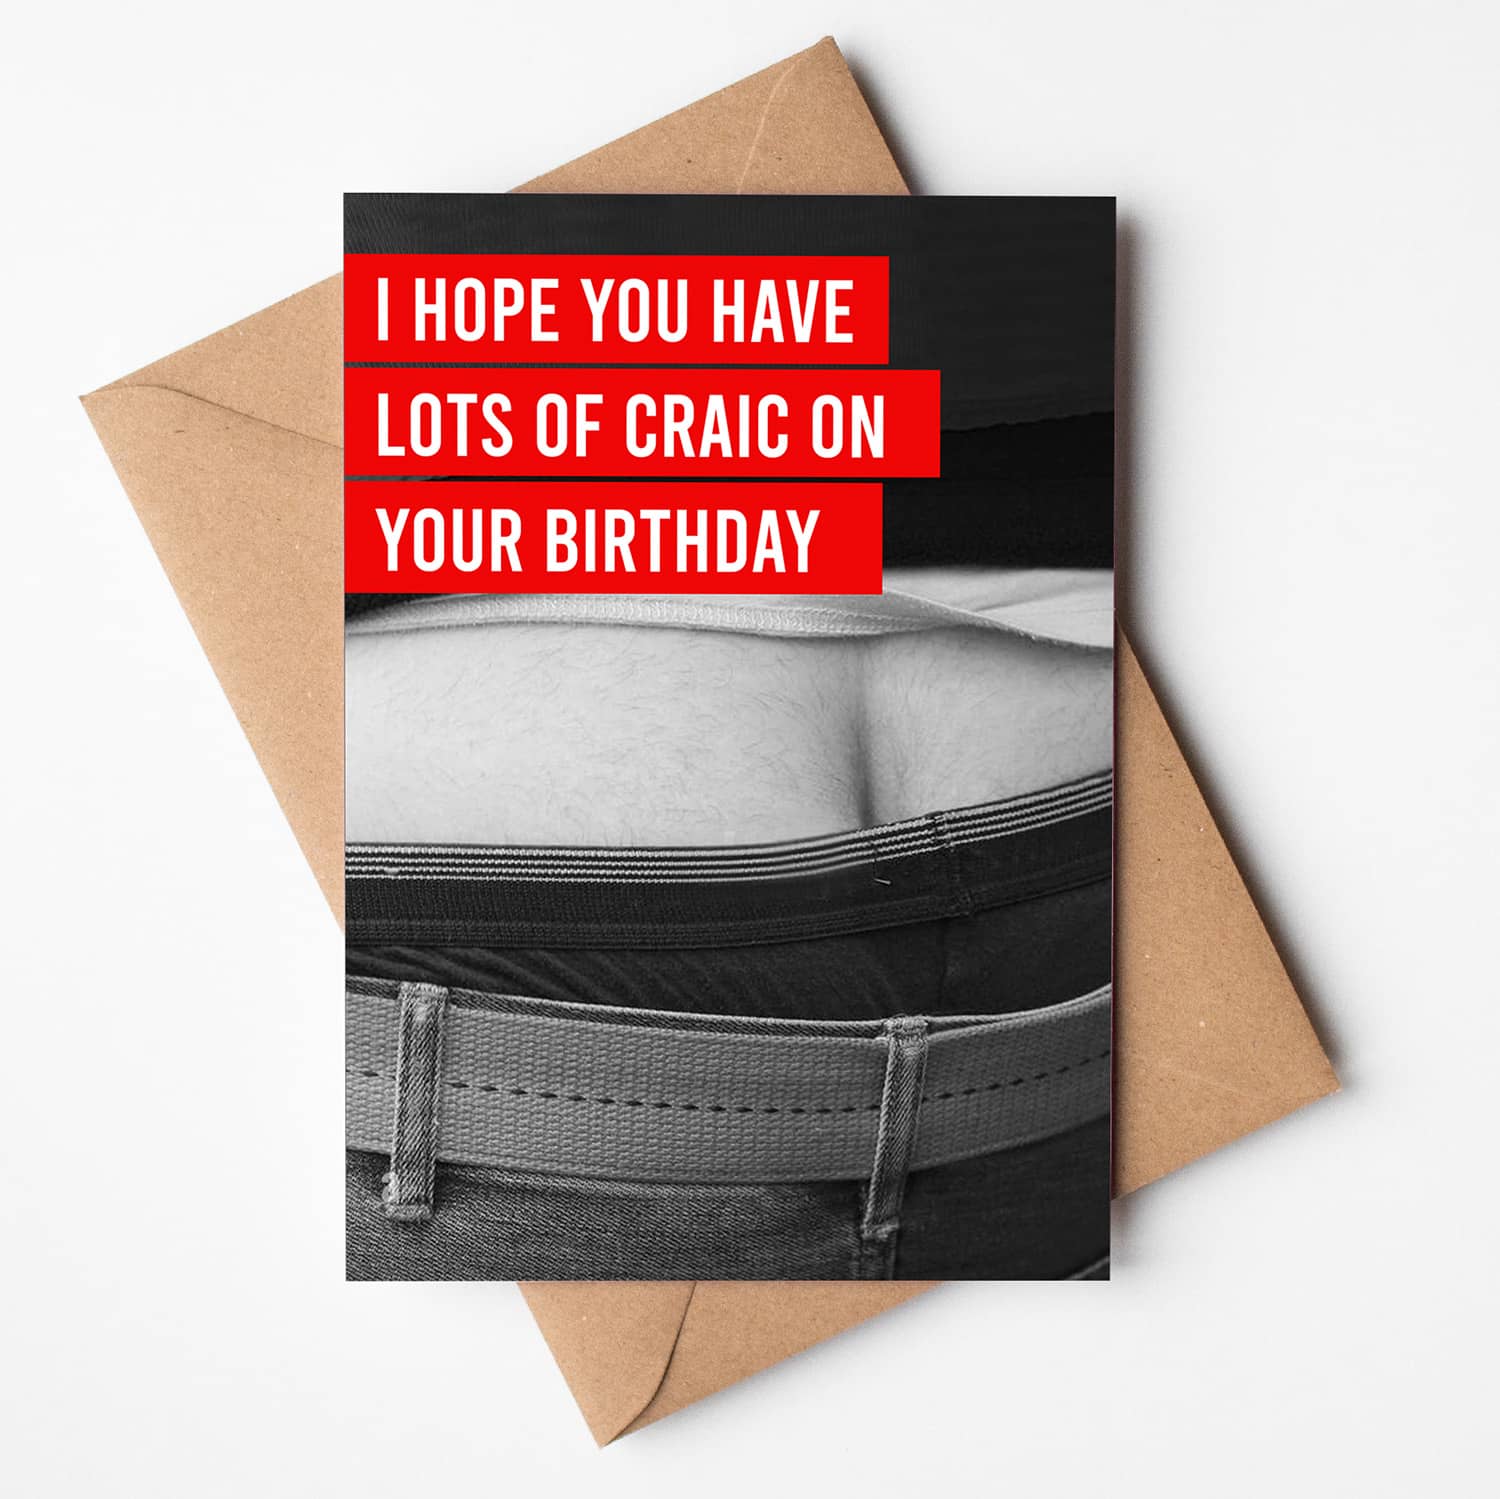 A funny birthday card that says " I hope you have lots of craic on your birthday"